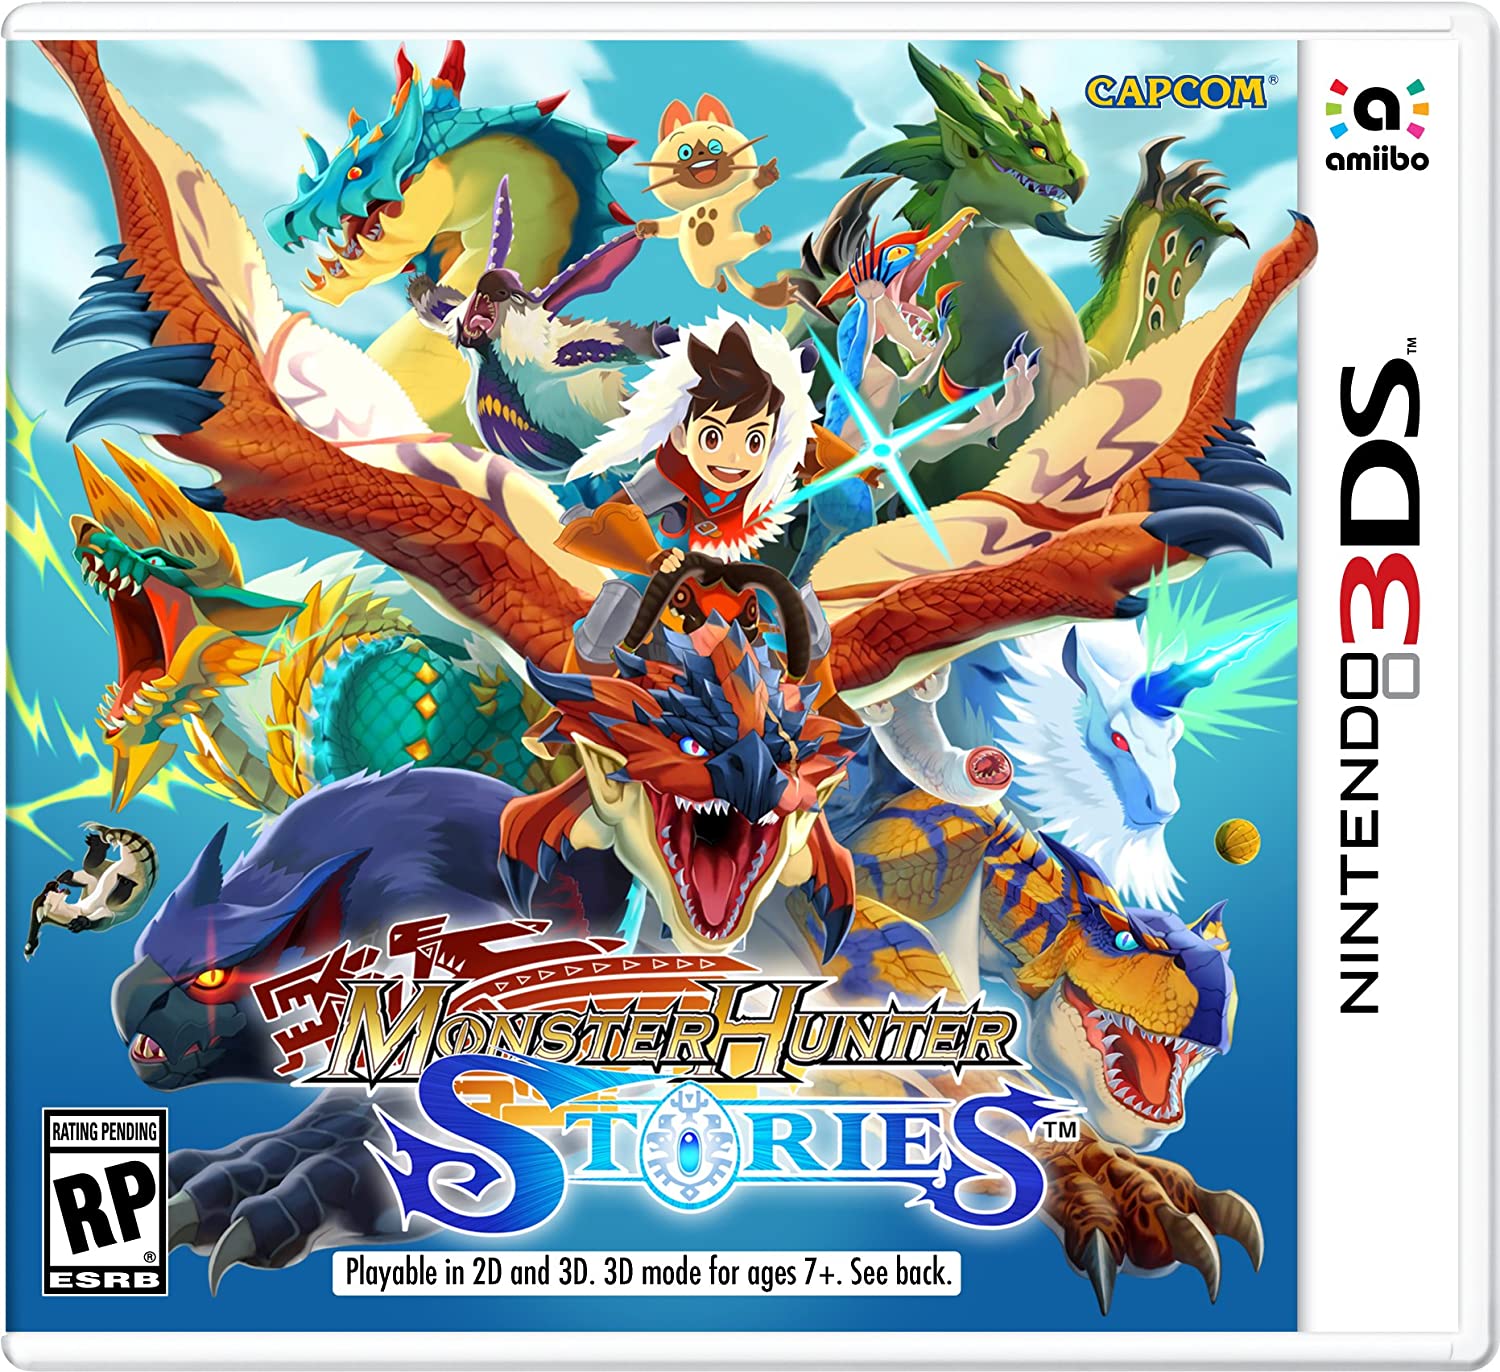 Monster hunter stories download code 3ds free play